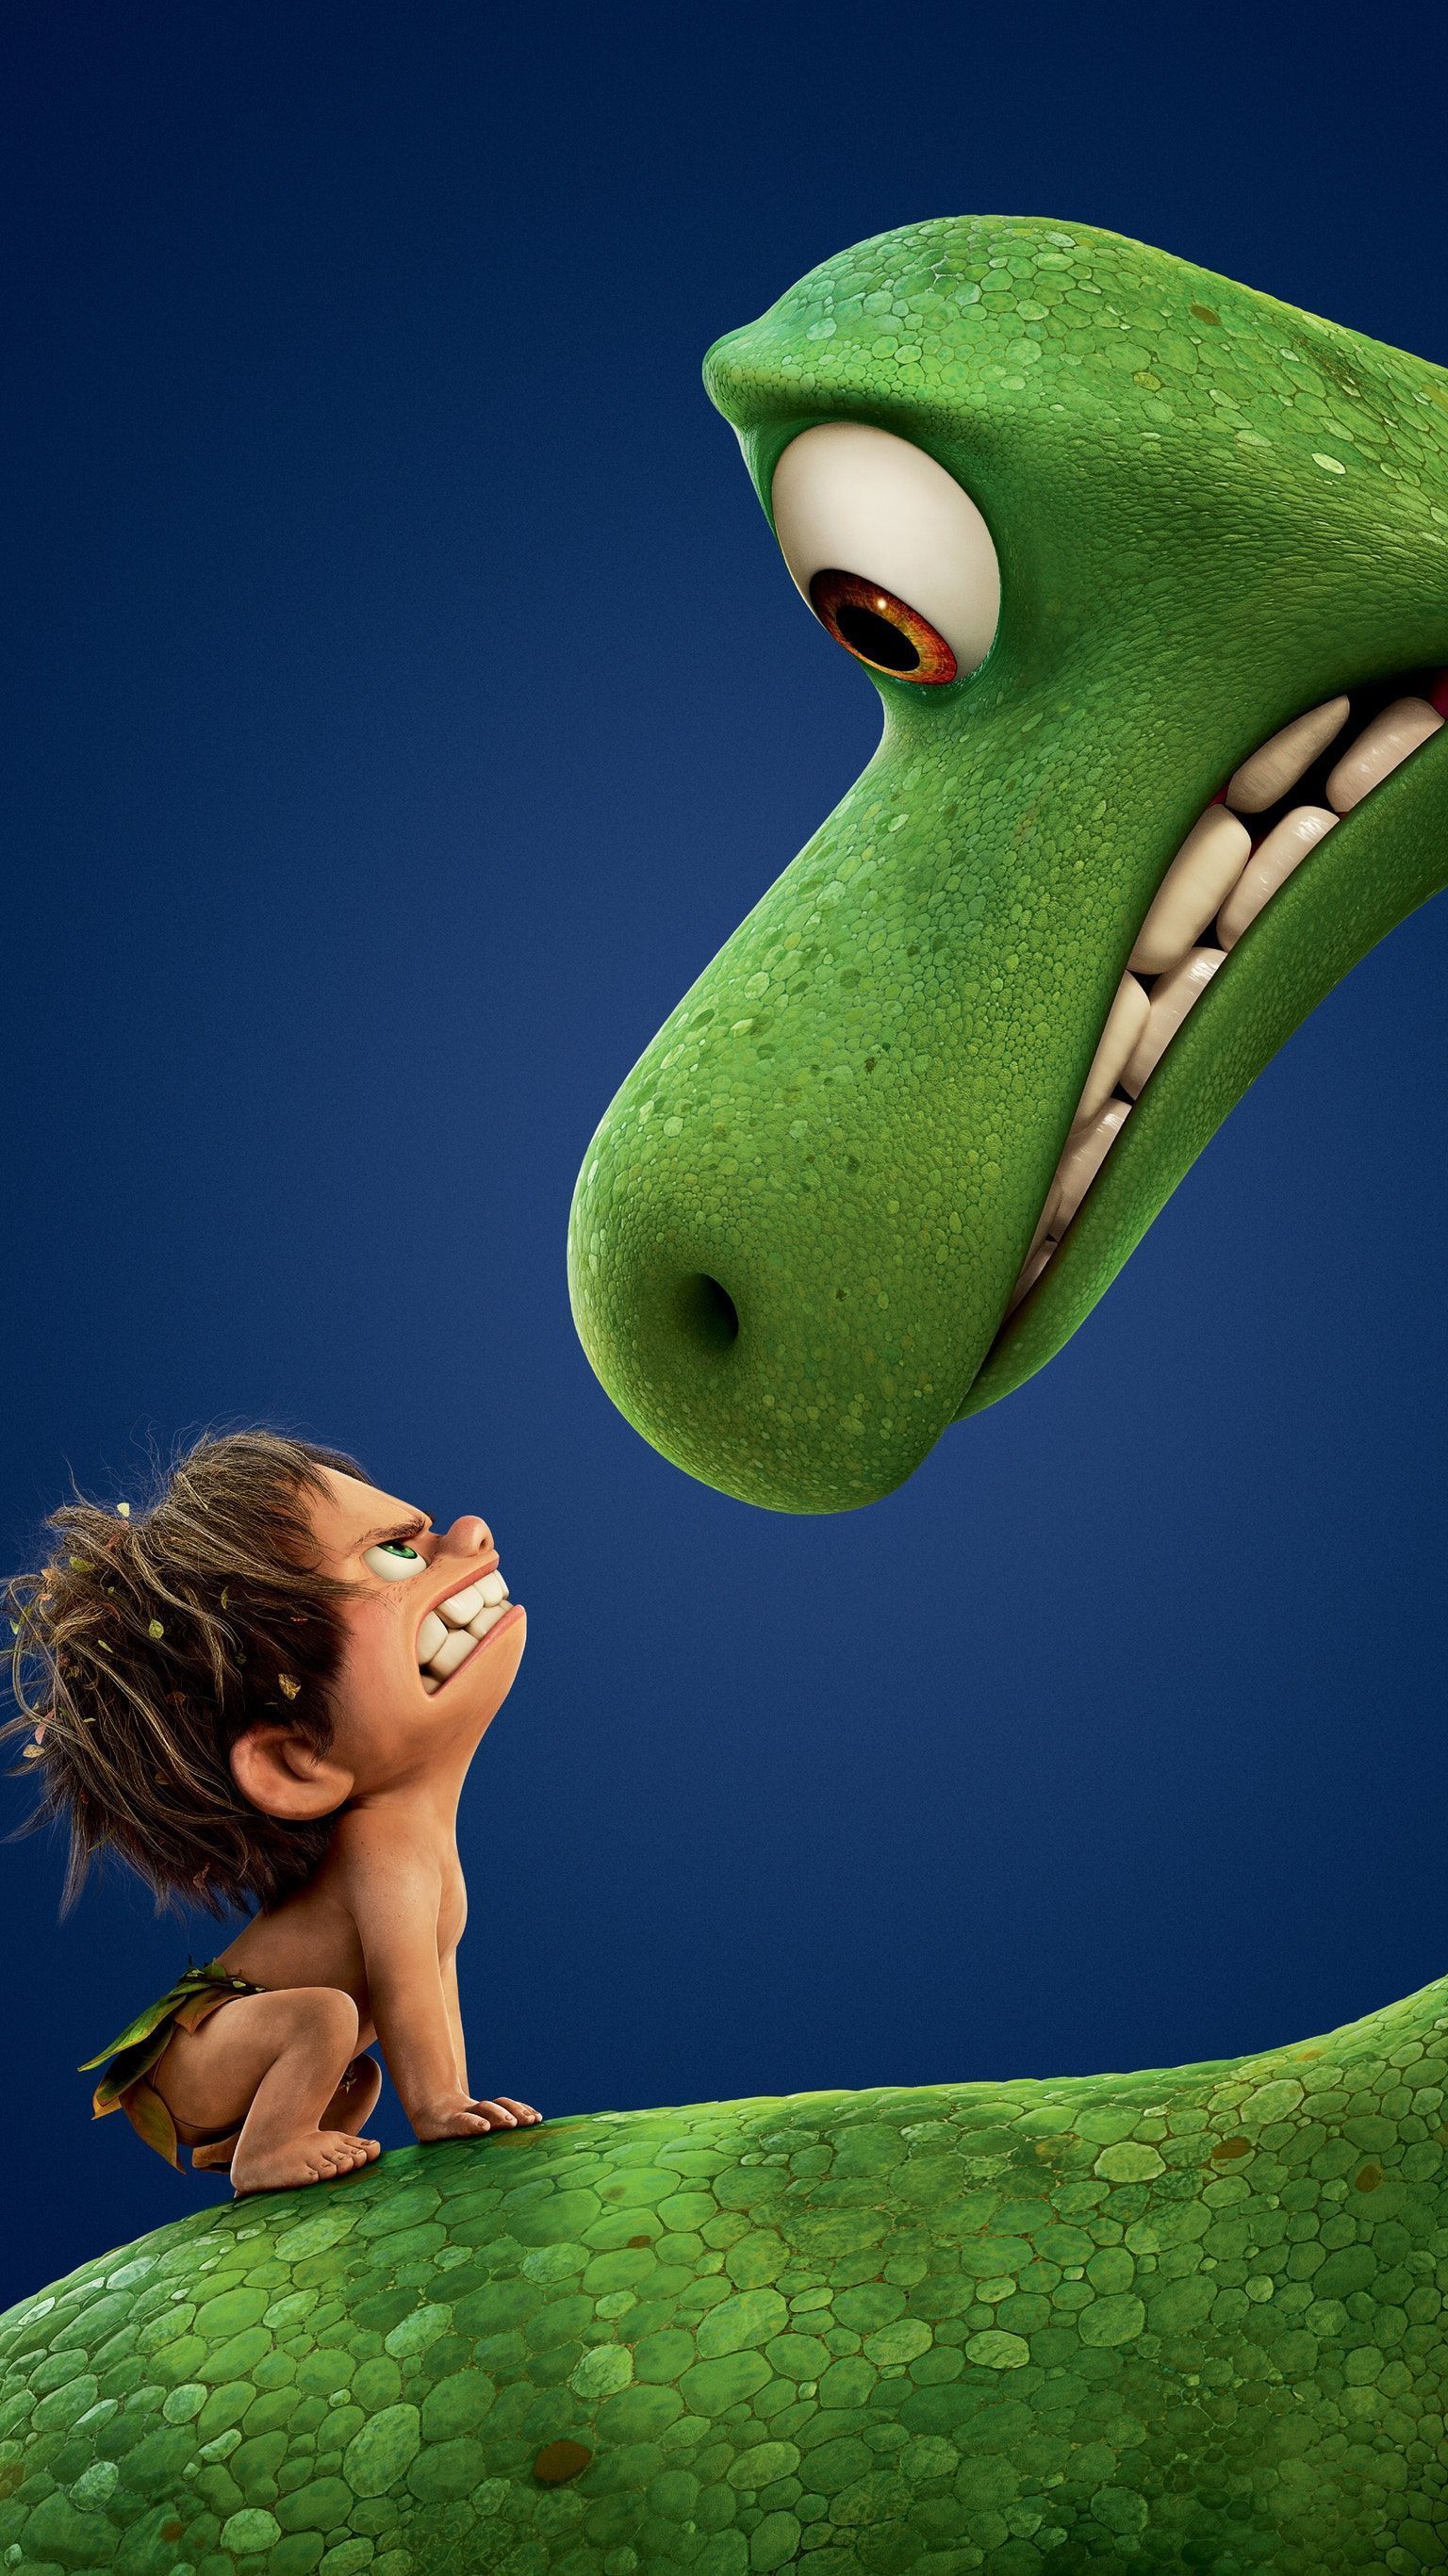 The Good Dinosaur Downloadable Wallpaper for iOS  Android Phones  For  The Love of Pixar